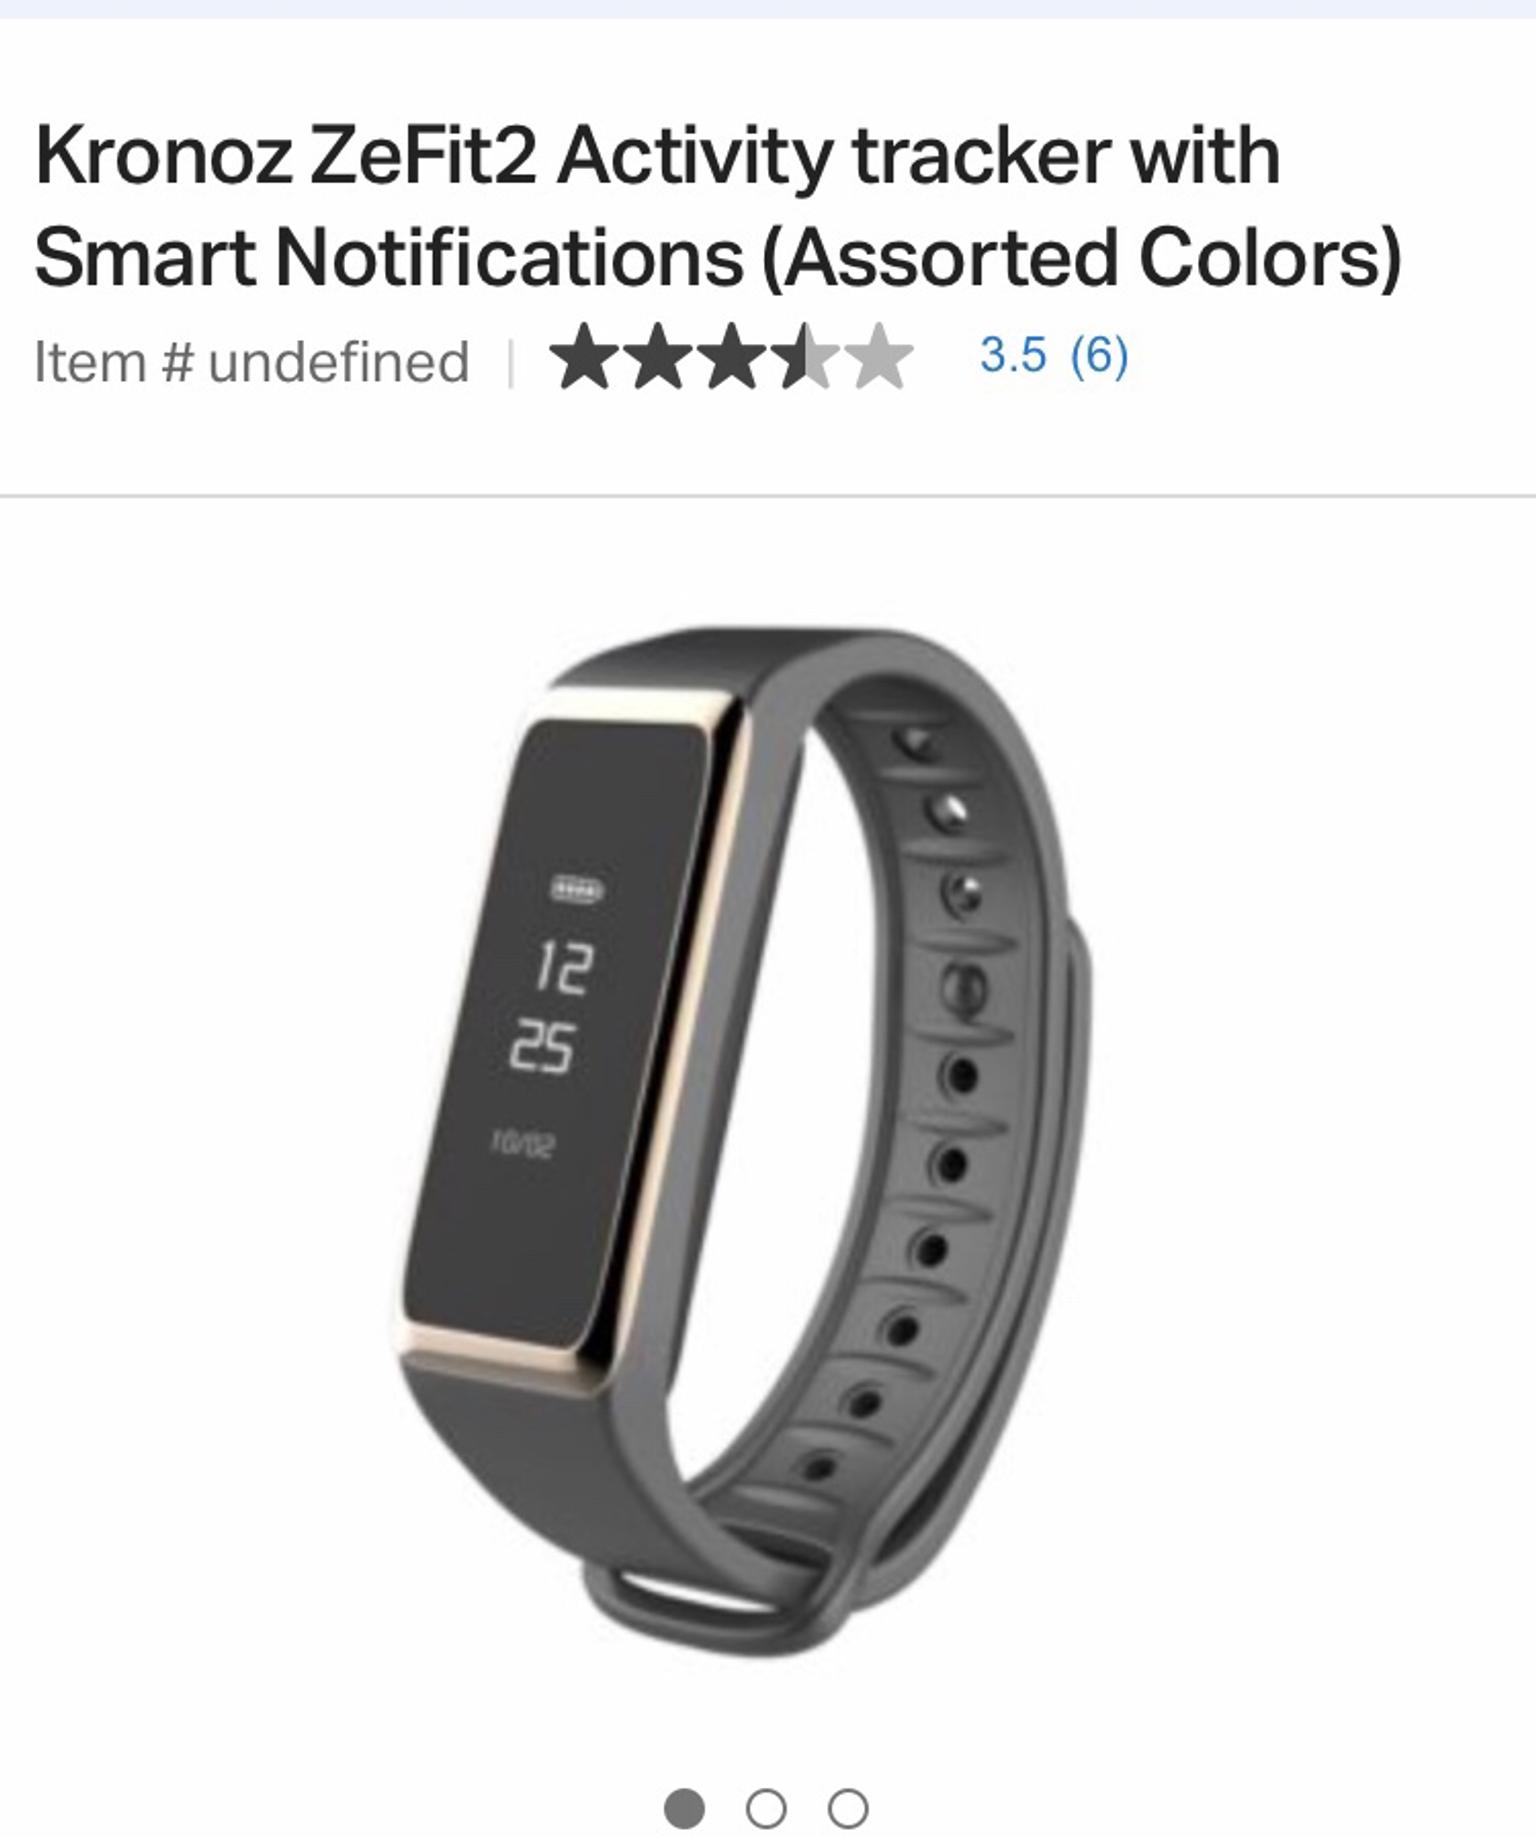 Designer Fitness Tracker Smart Watches In Ol12 Rochdale For 12 50 For Sale Shpock,Modern L Shaped Kitchen Designs For Small Kitchens